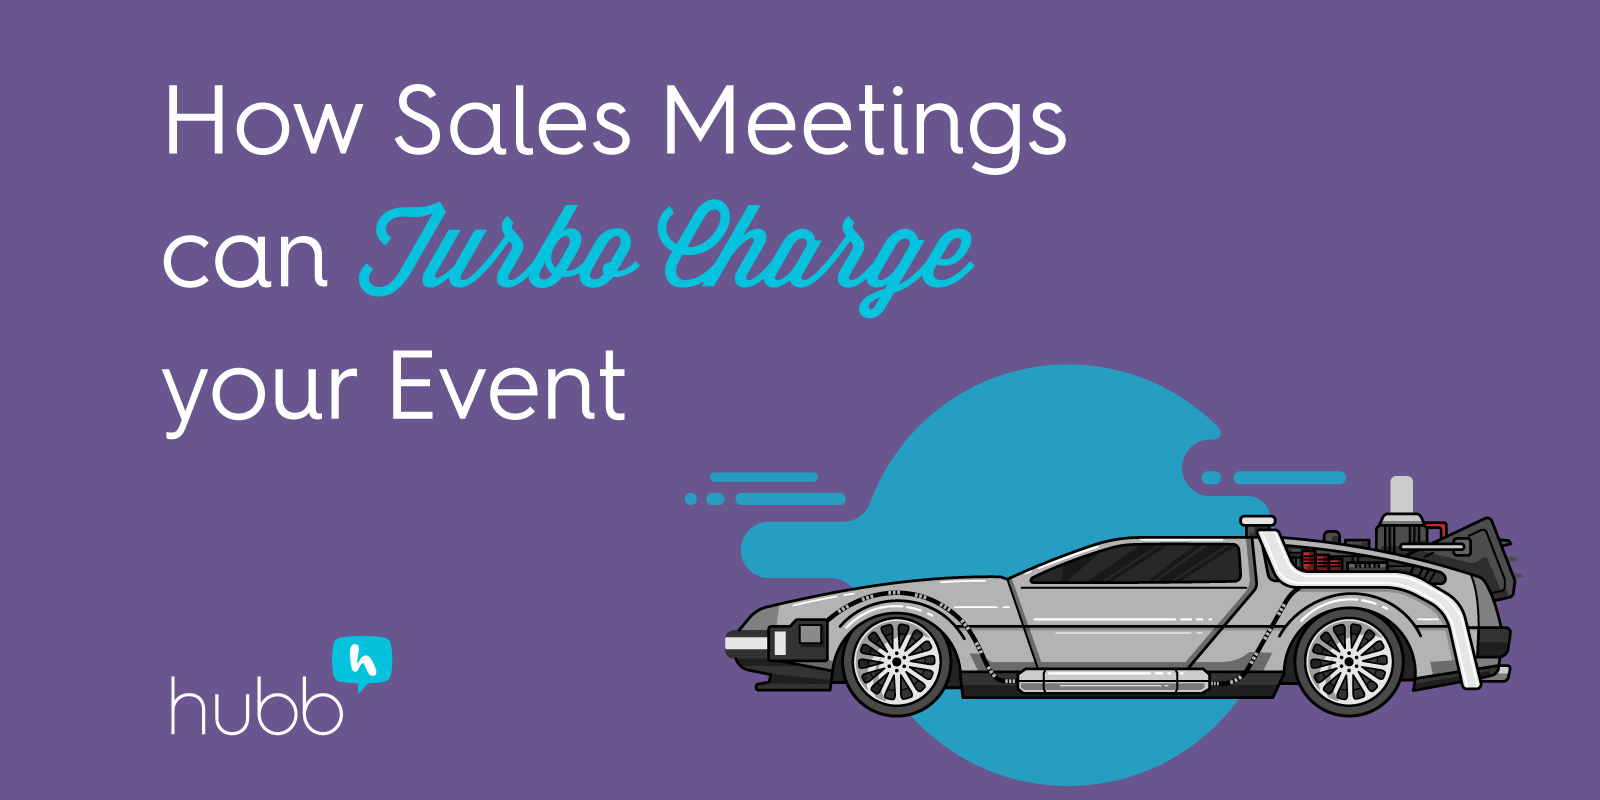 SalesMeetings-Turbo-Charge-Event-Social